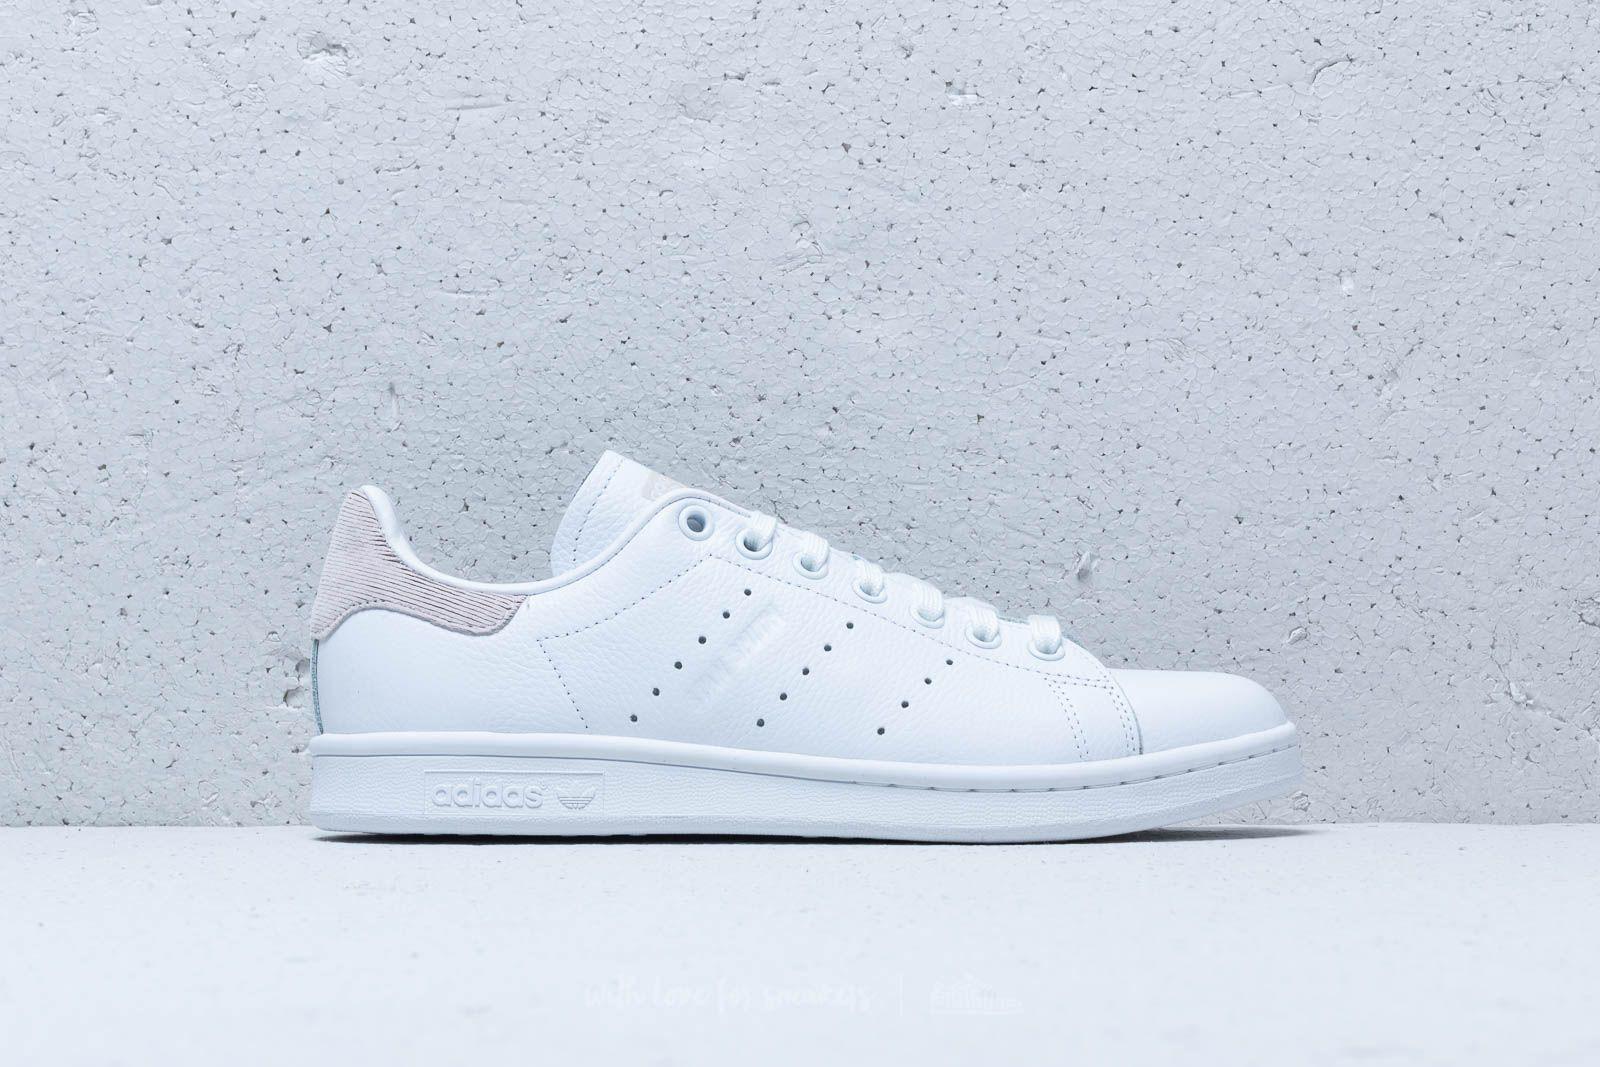 orchid tint stan smith